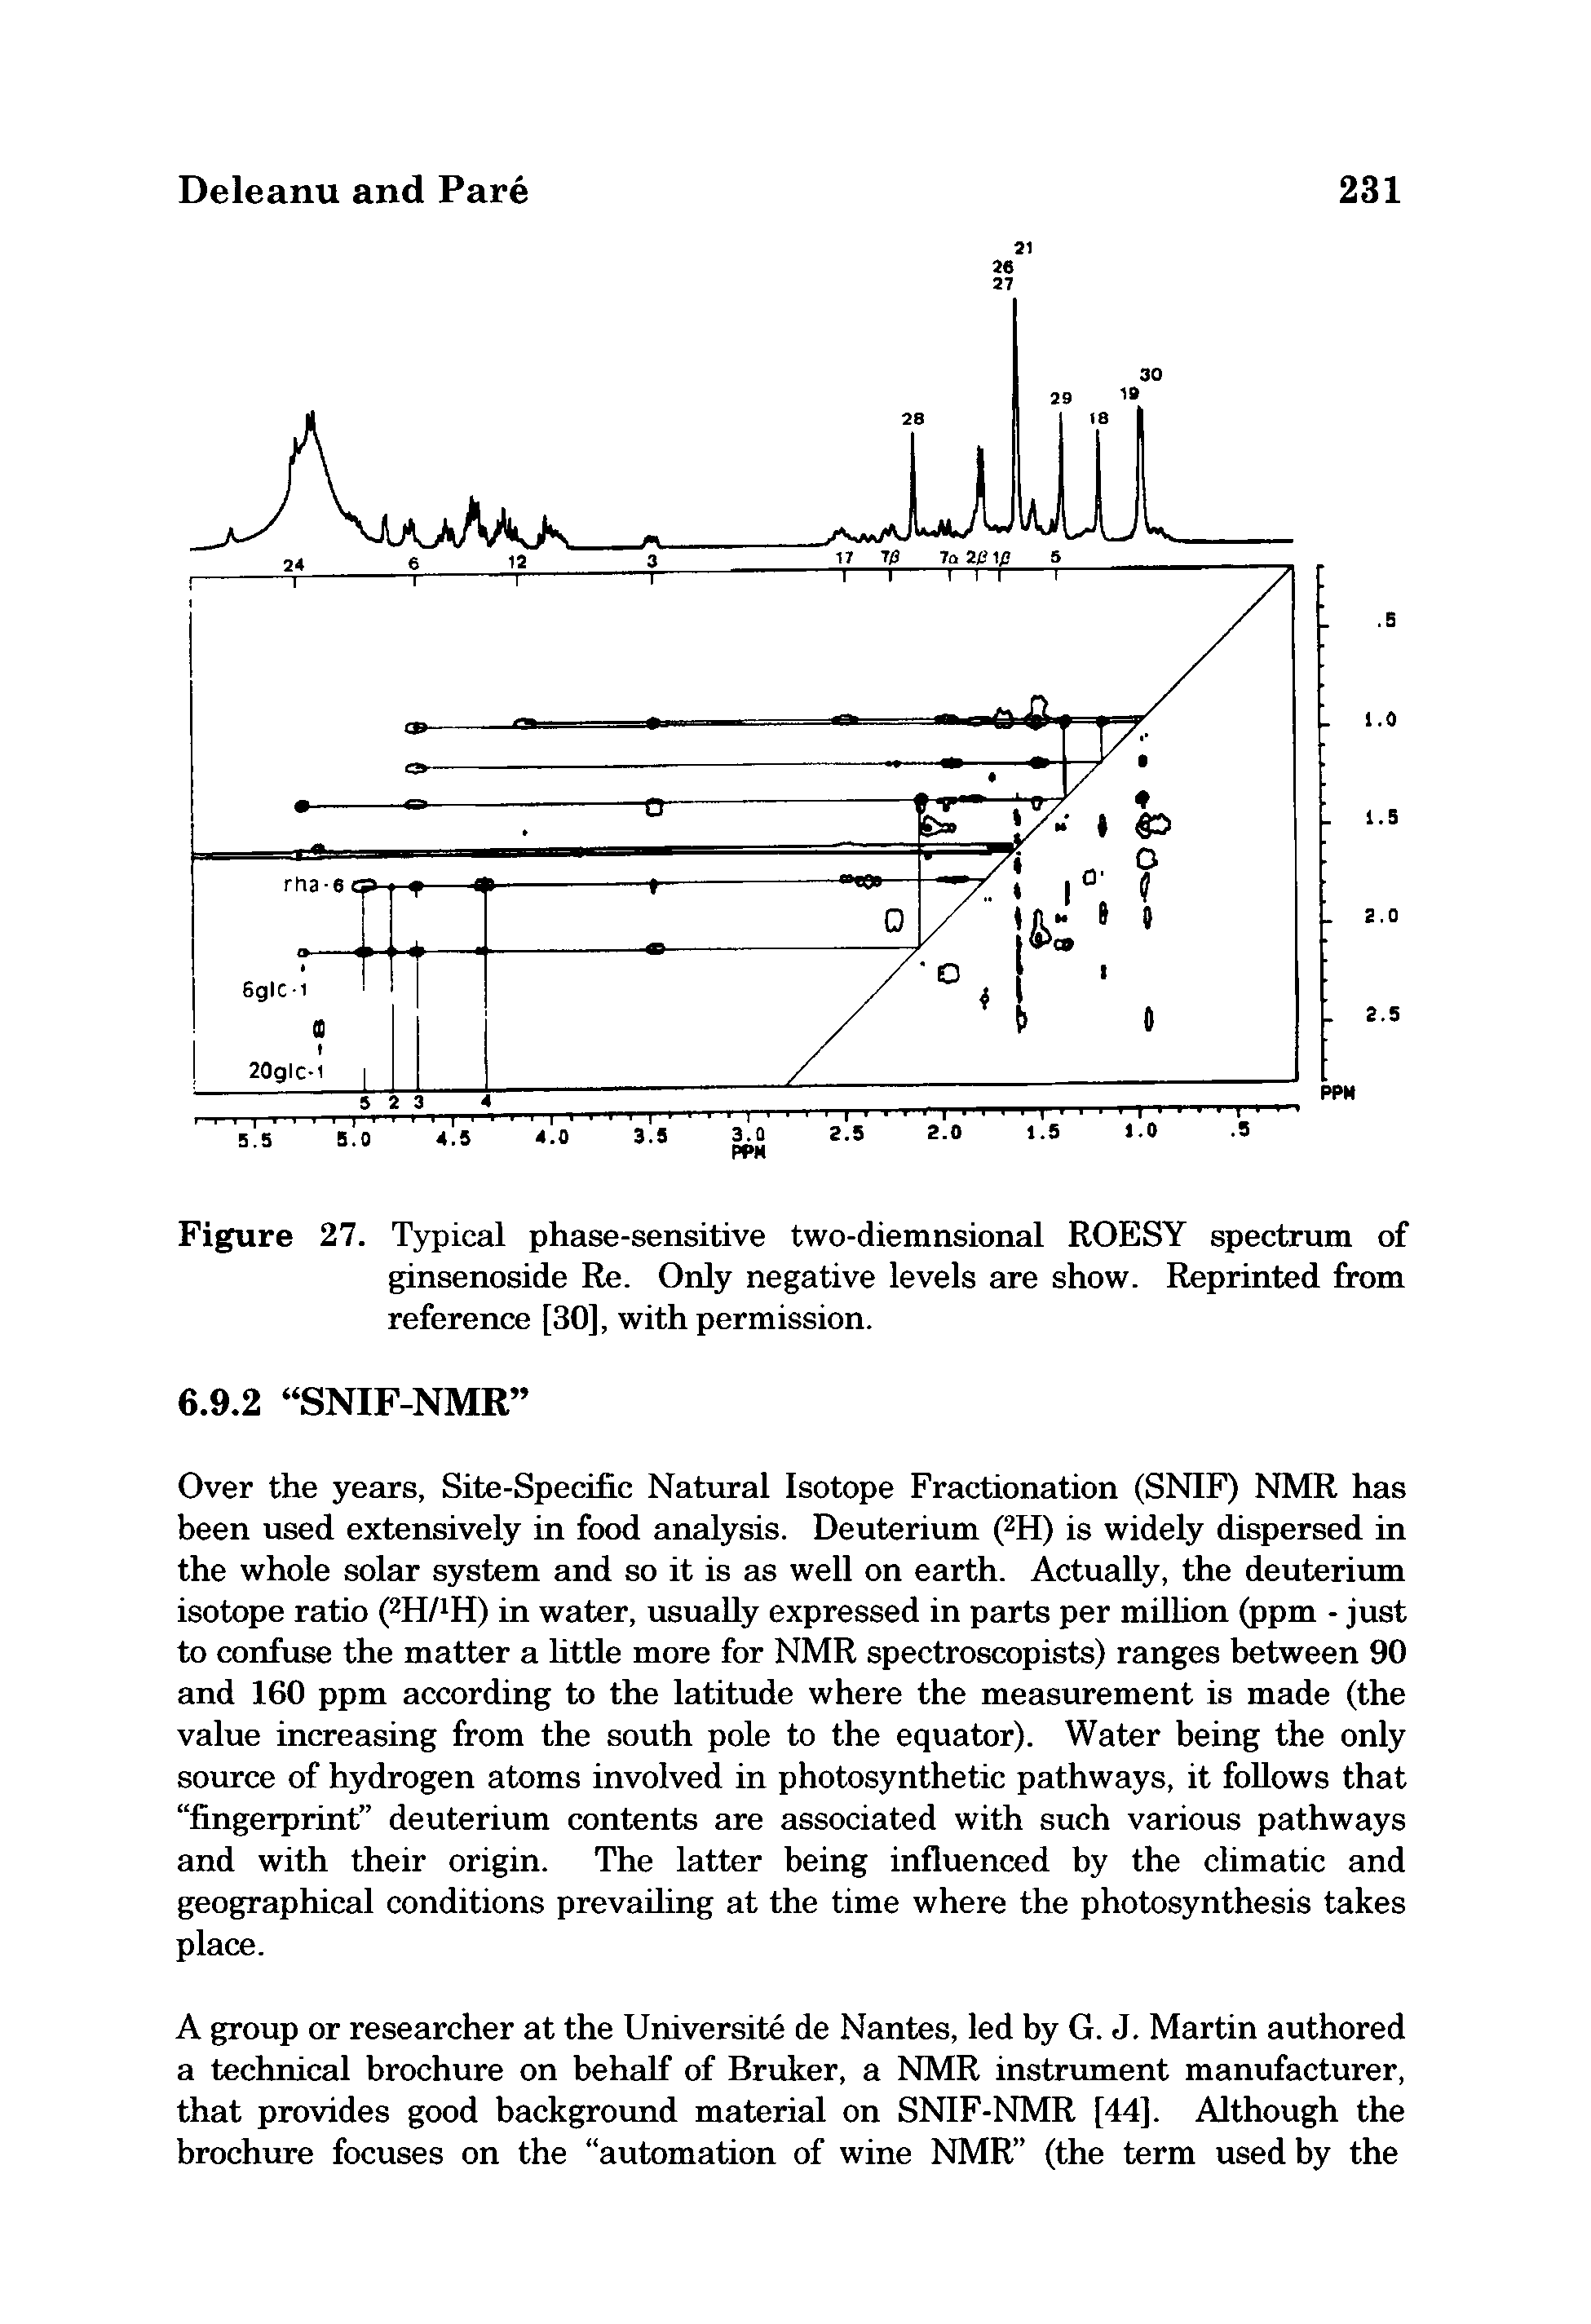 Figure 27. Typical phase-sensitive two-diemnsional ROESY spectrum of ginsenoside Re. Only negative levels are show. Reprinted from reference [30], with permission.